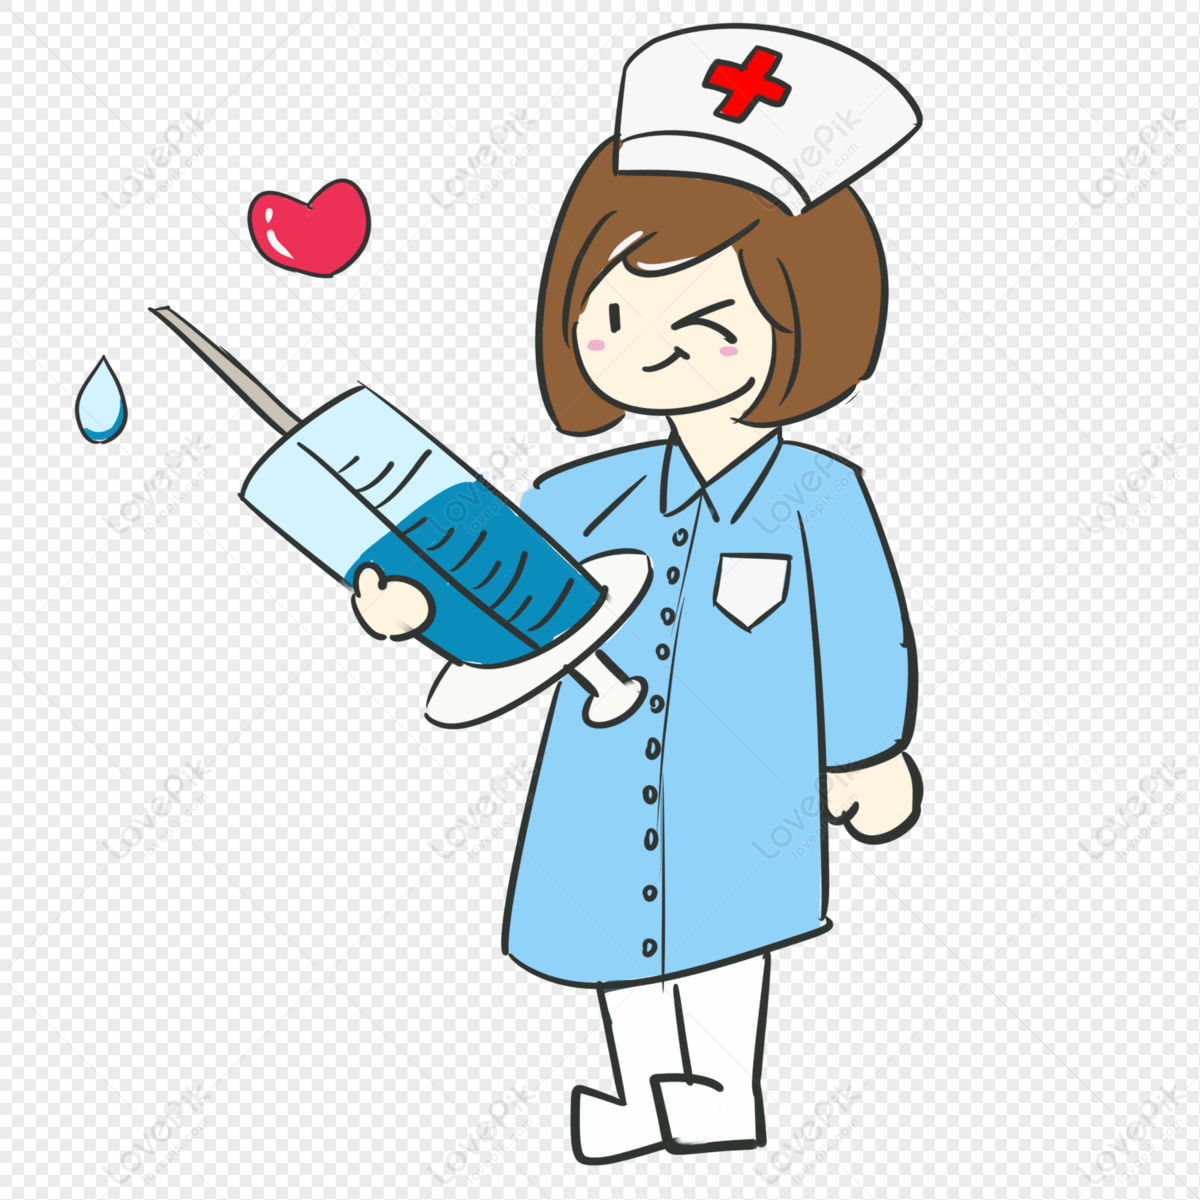 Cute Nurse Giving An Injection PNG Picture And Clipart Image For Free  Download - Lovepik | 401179855